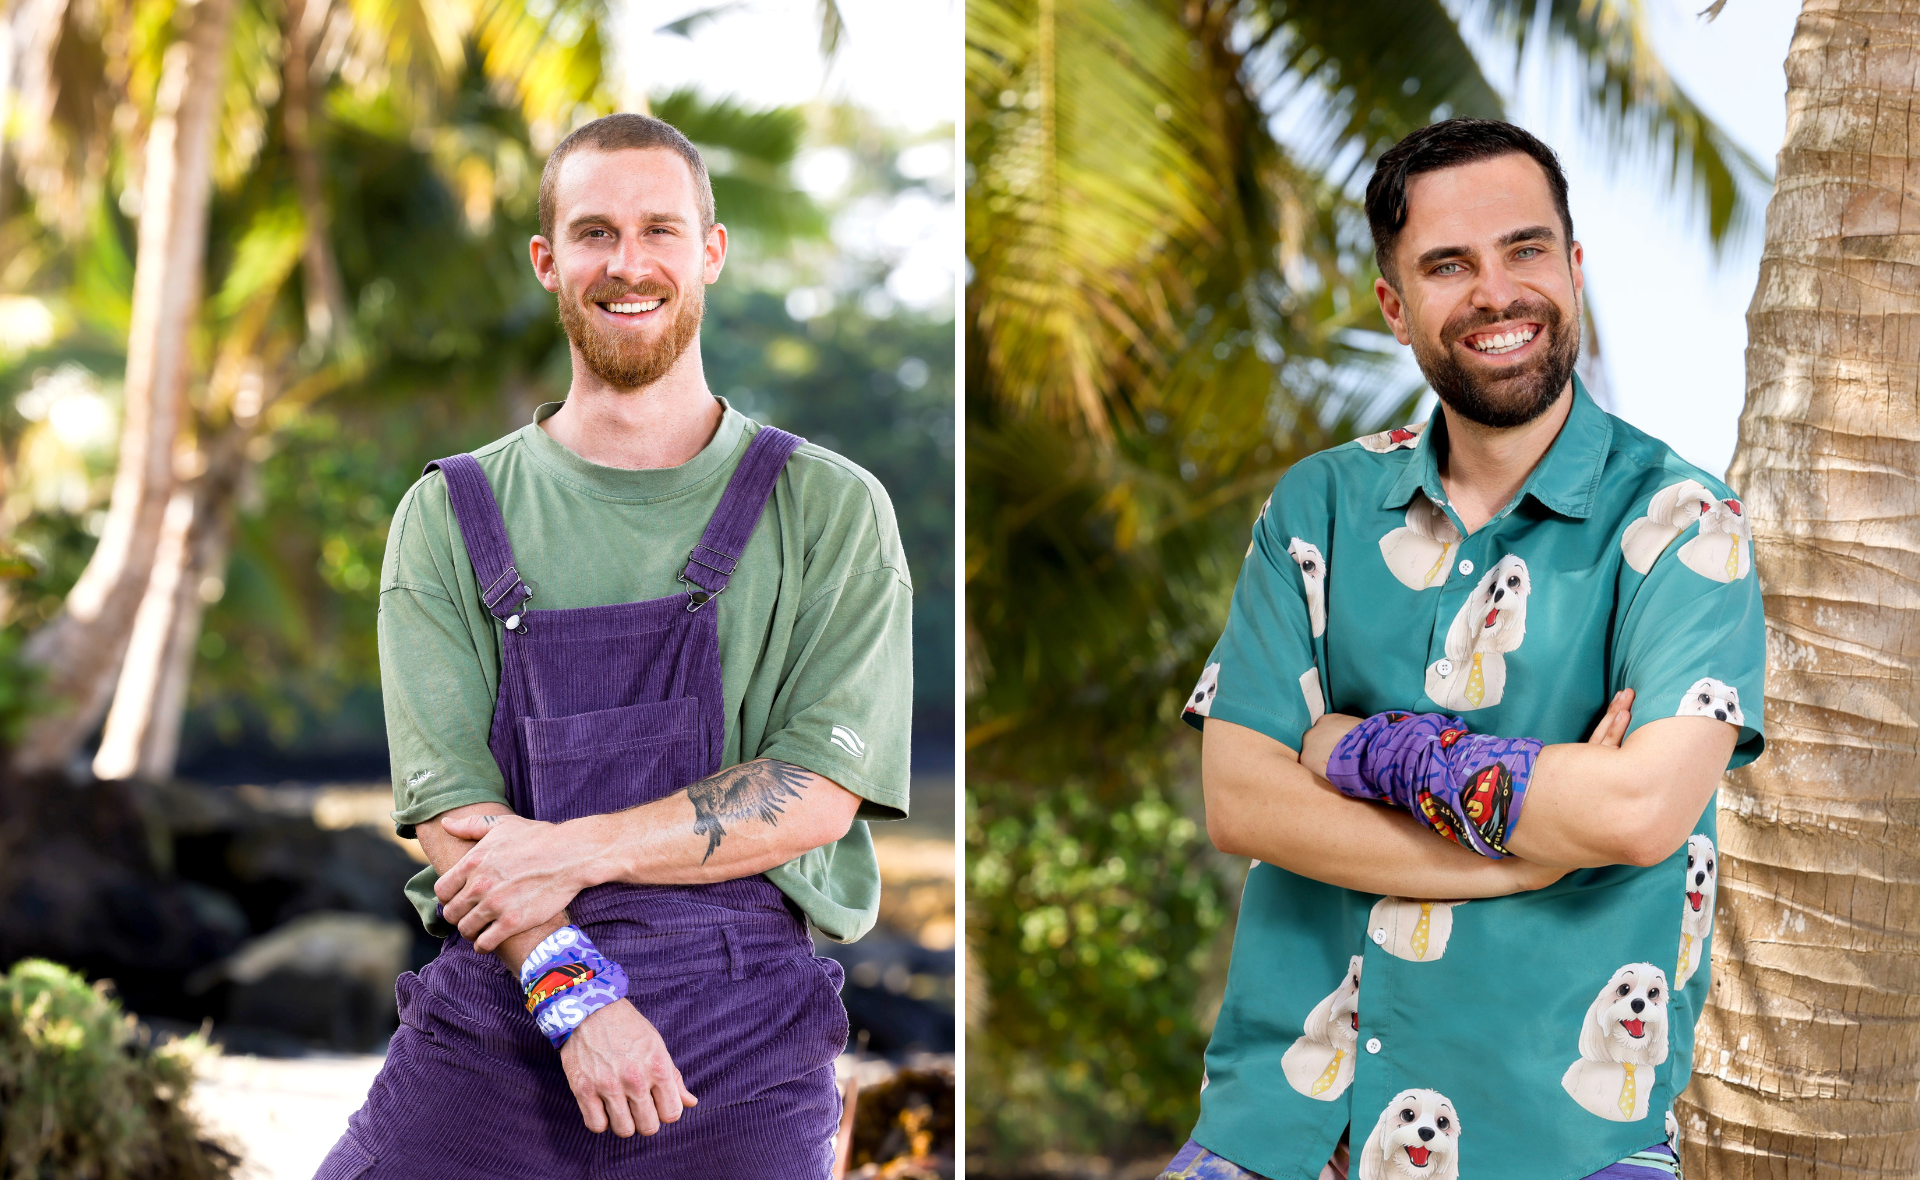 Survivor Ep 5 Recap: The King and the Joker form an unlikely alliance